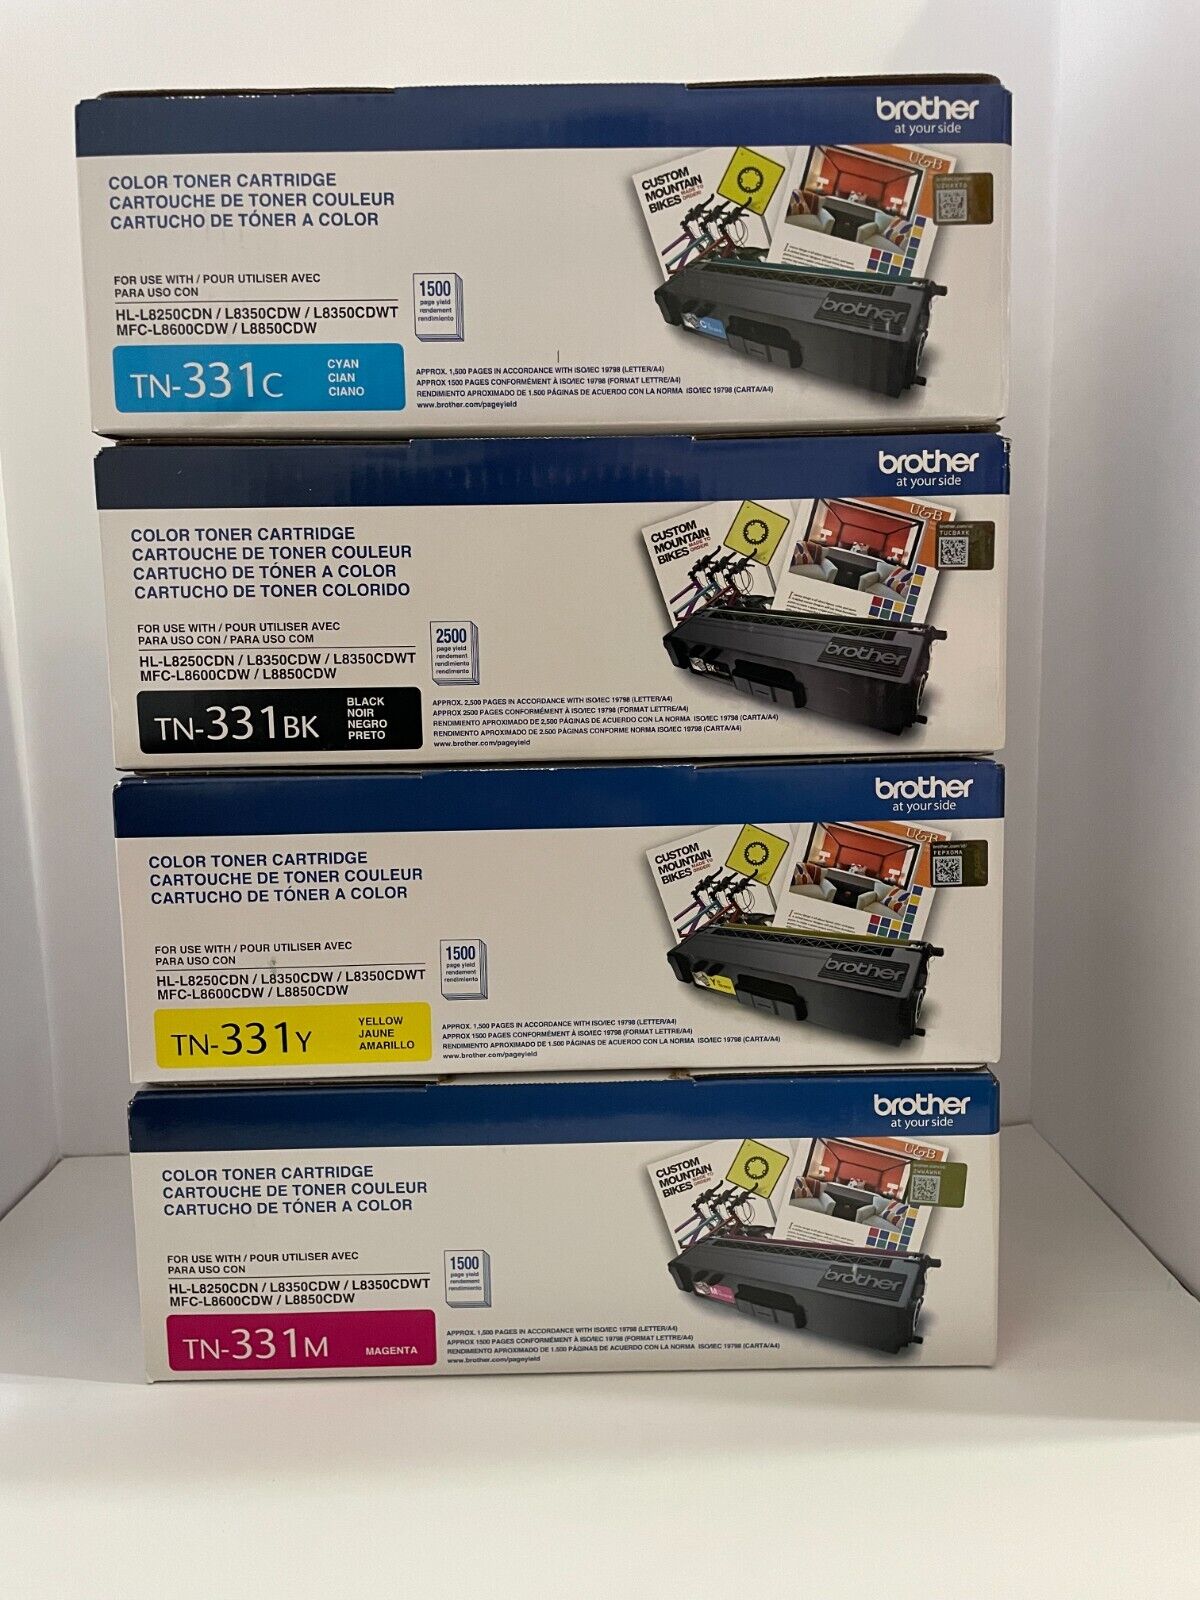 Brother Genuine TN331 Standard Yield Toner Cartridge Set of 4 Colors New In Box